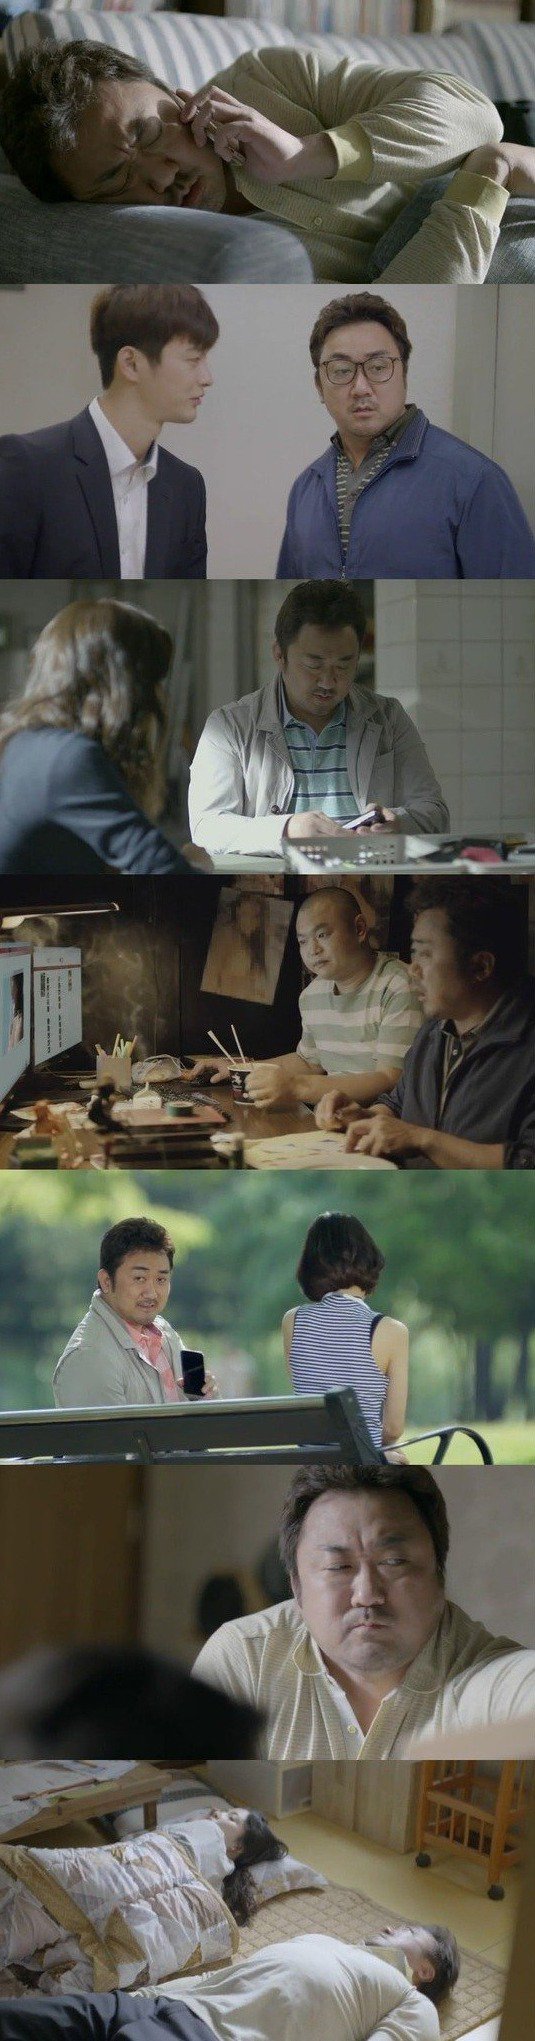 episodes 3 and 4 captures for the Korean drama '38 Revenue Collection Unit'